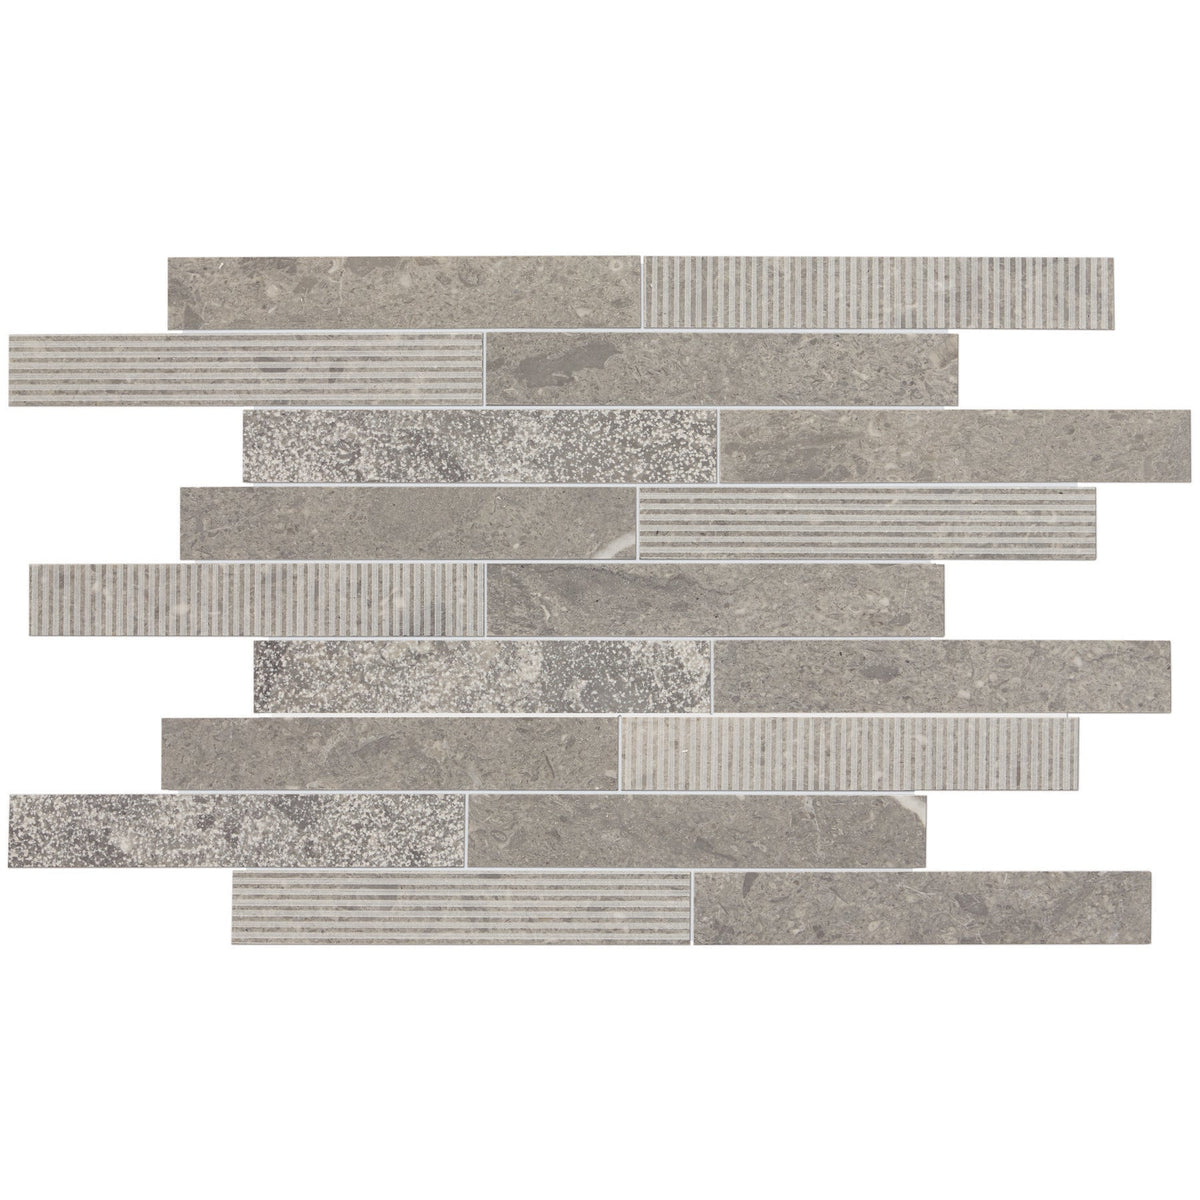 Daltile - Center City - 6 in. x 24 in. Linear Mosaic - Arch Grey